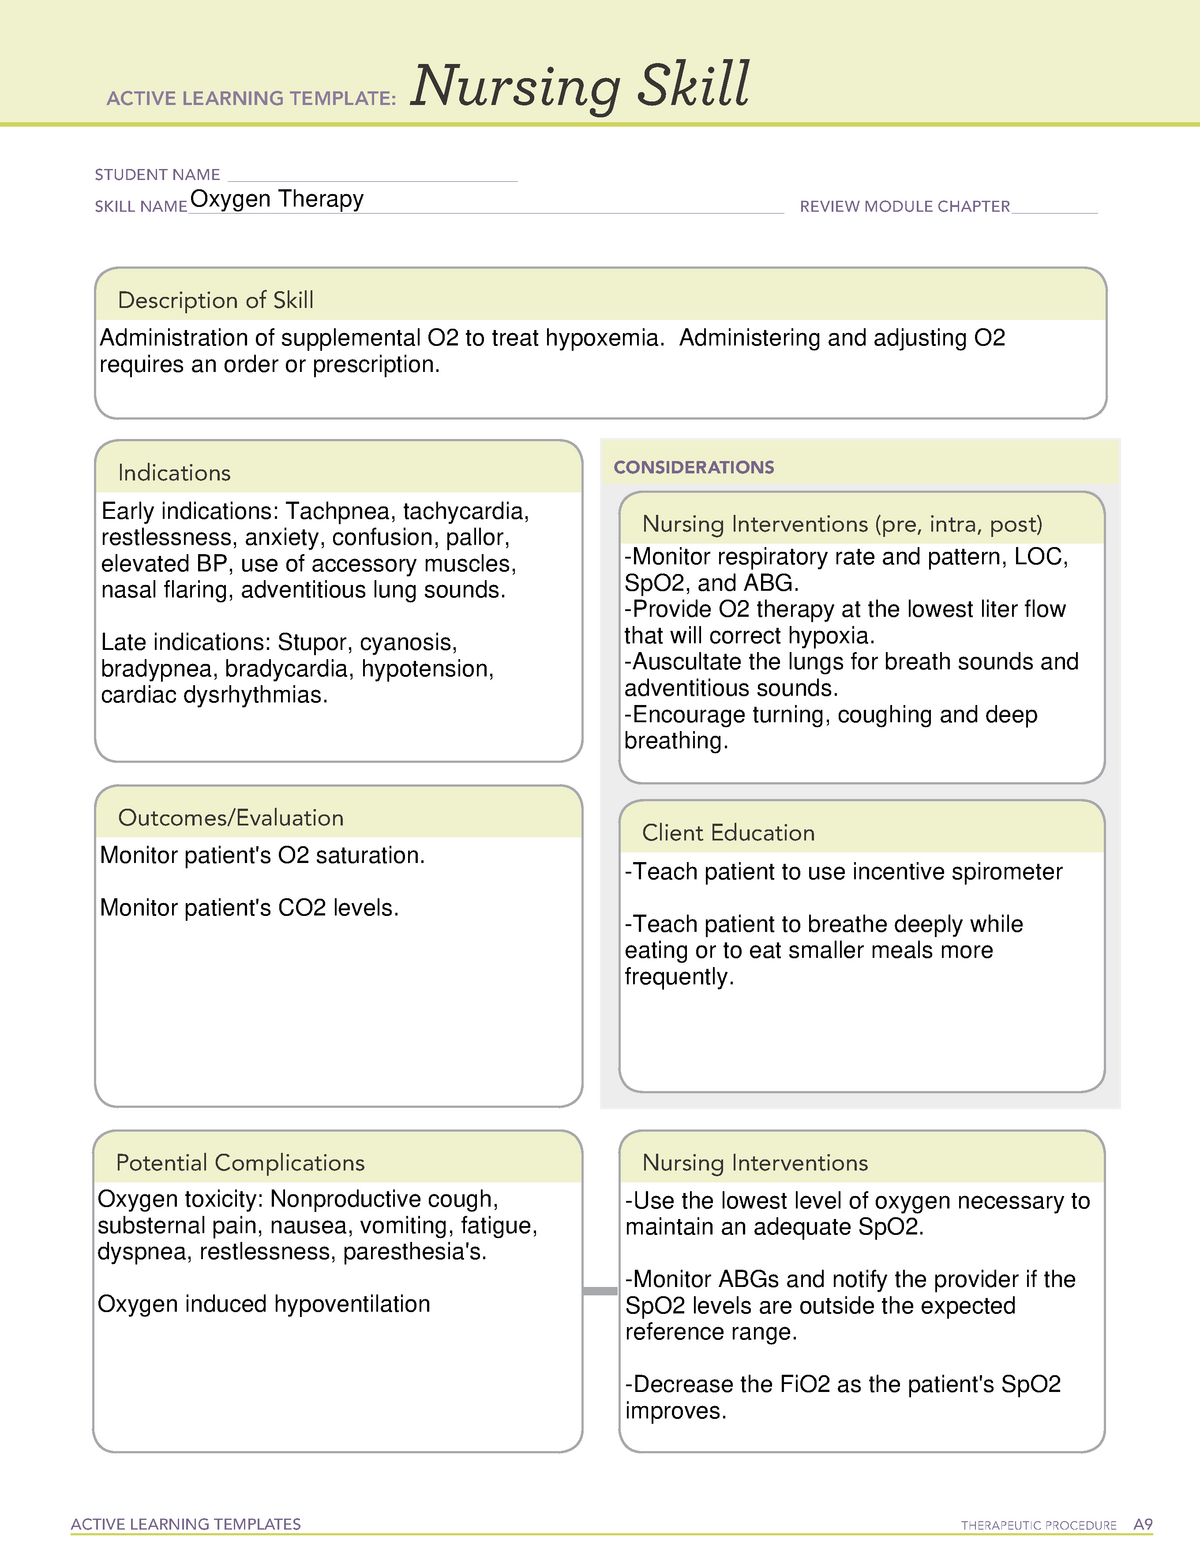 oxygen-therapy-ati-template-active-learning-templates-therapeutic-procedure-a-nursing-skill